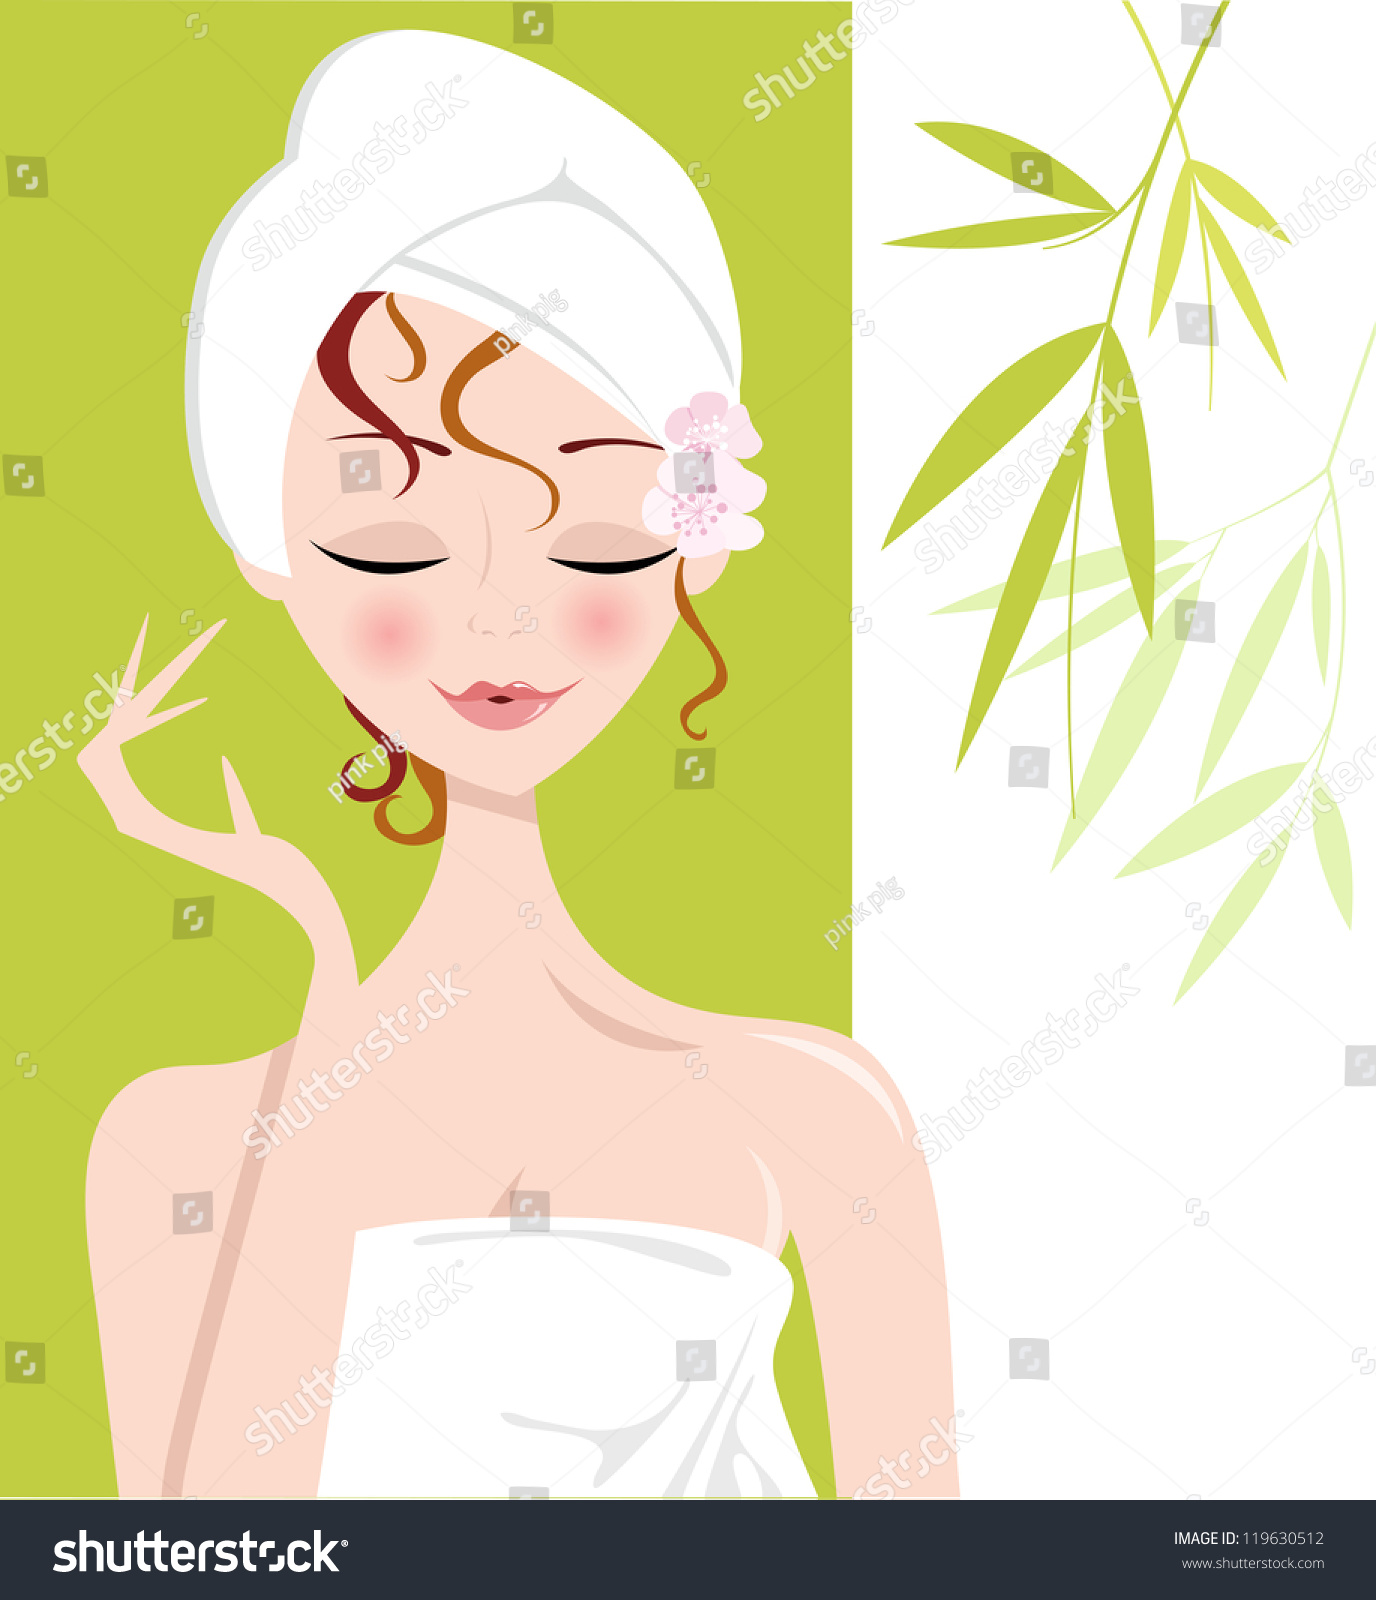 girl relaxing clipart - photo #41